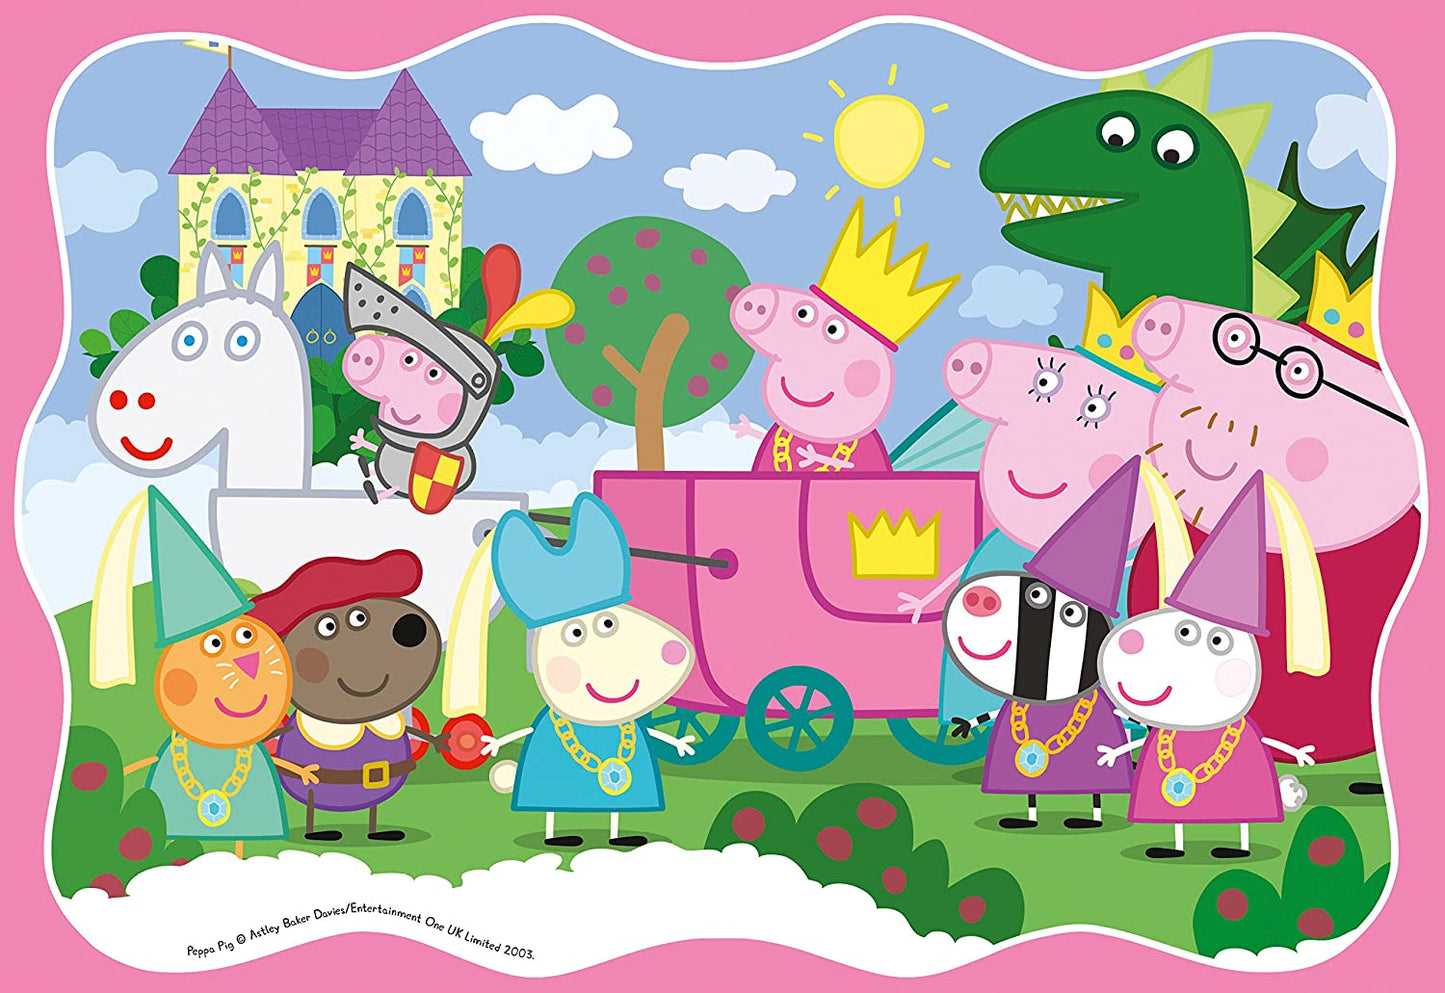 Ravensburger - Peppa Pig 3 in a Box - 15, 20, 25 Piece Jigsaw Puzzle